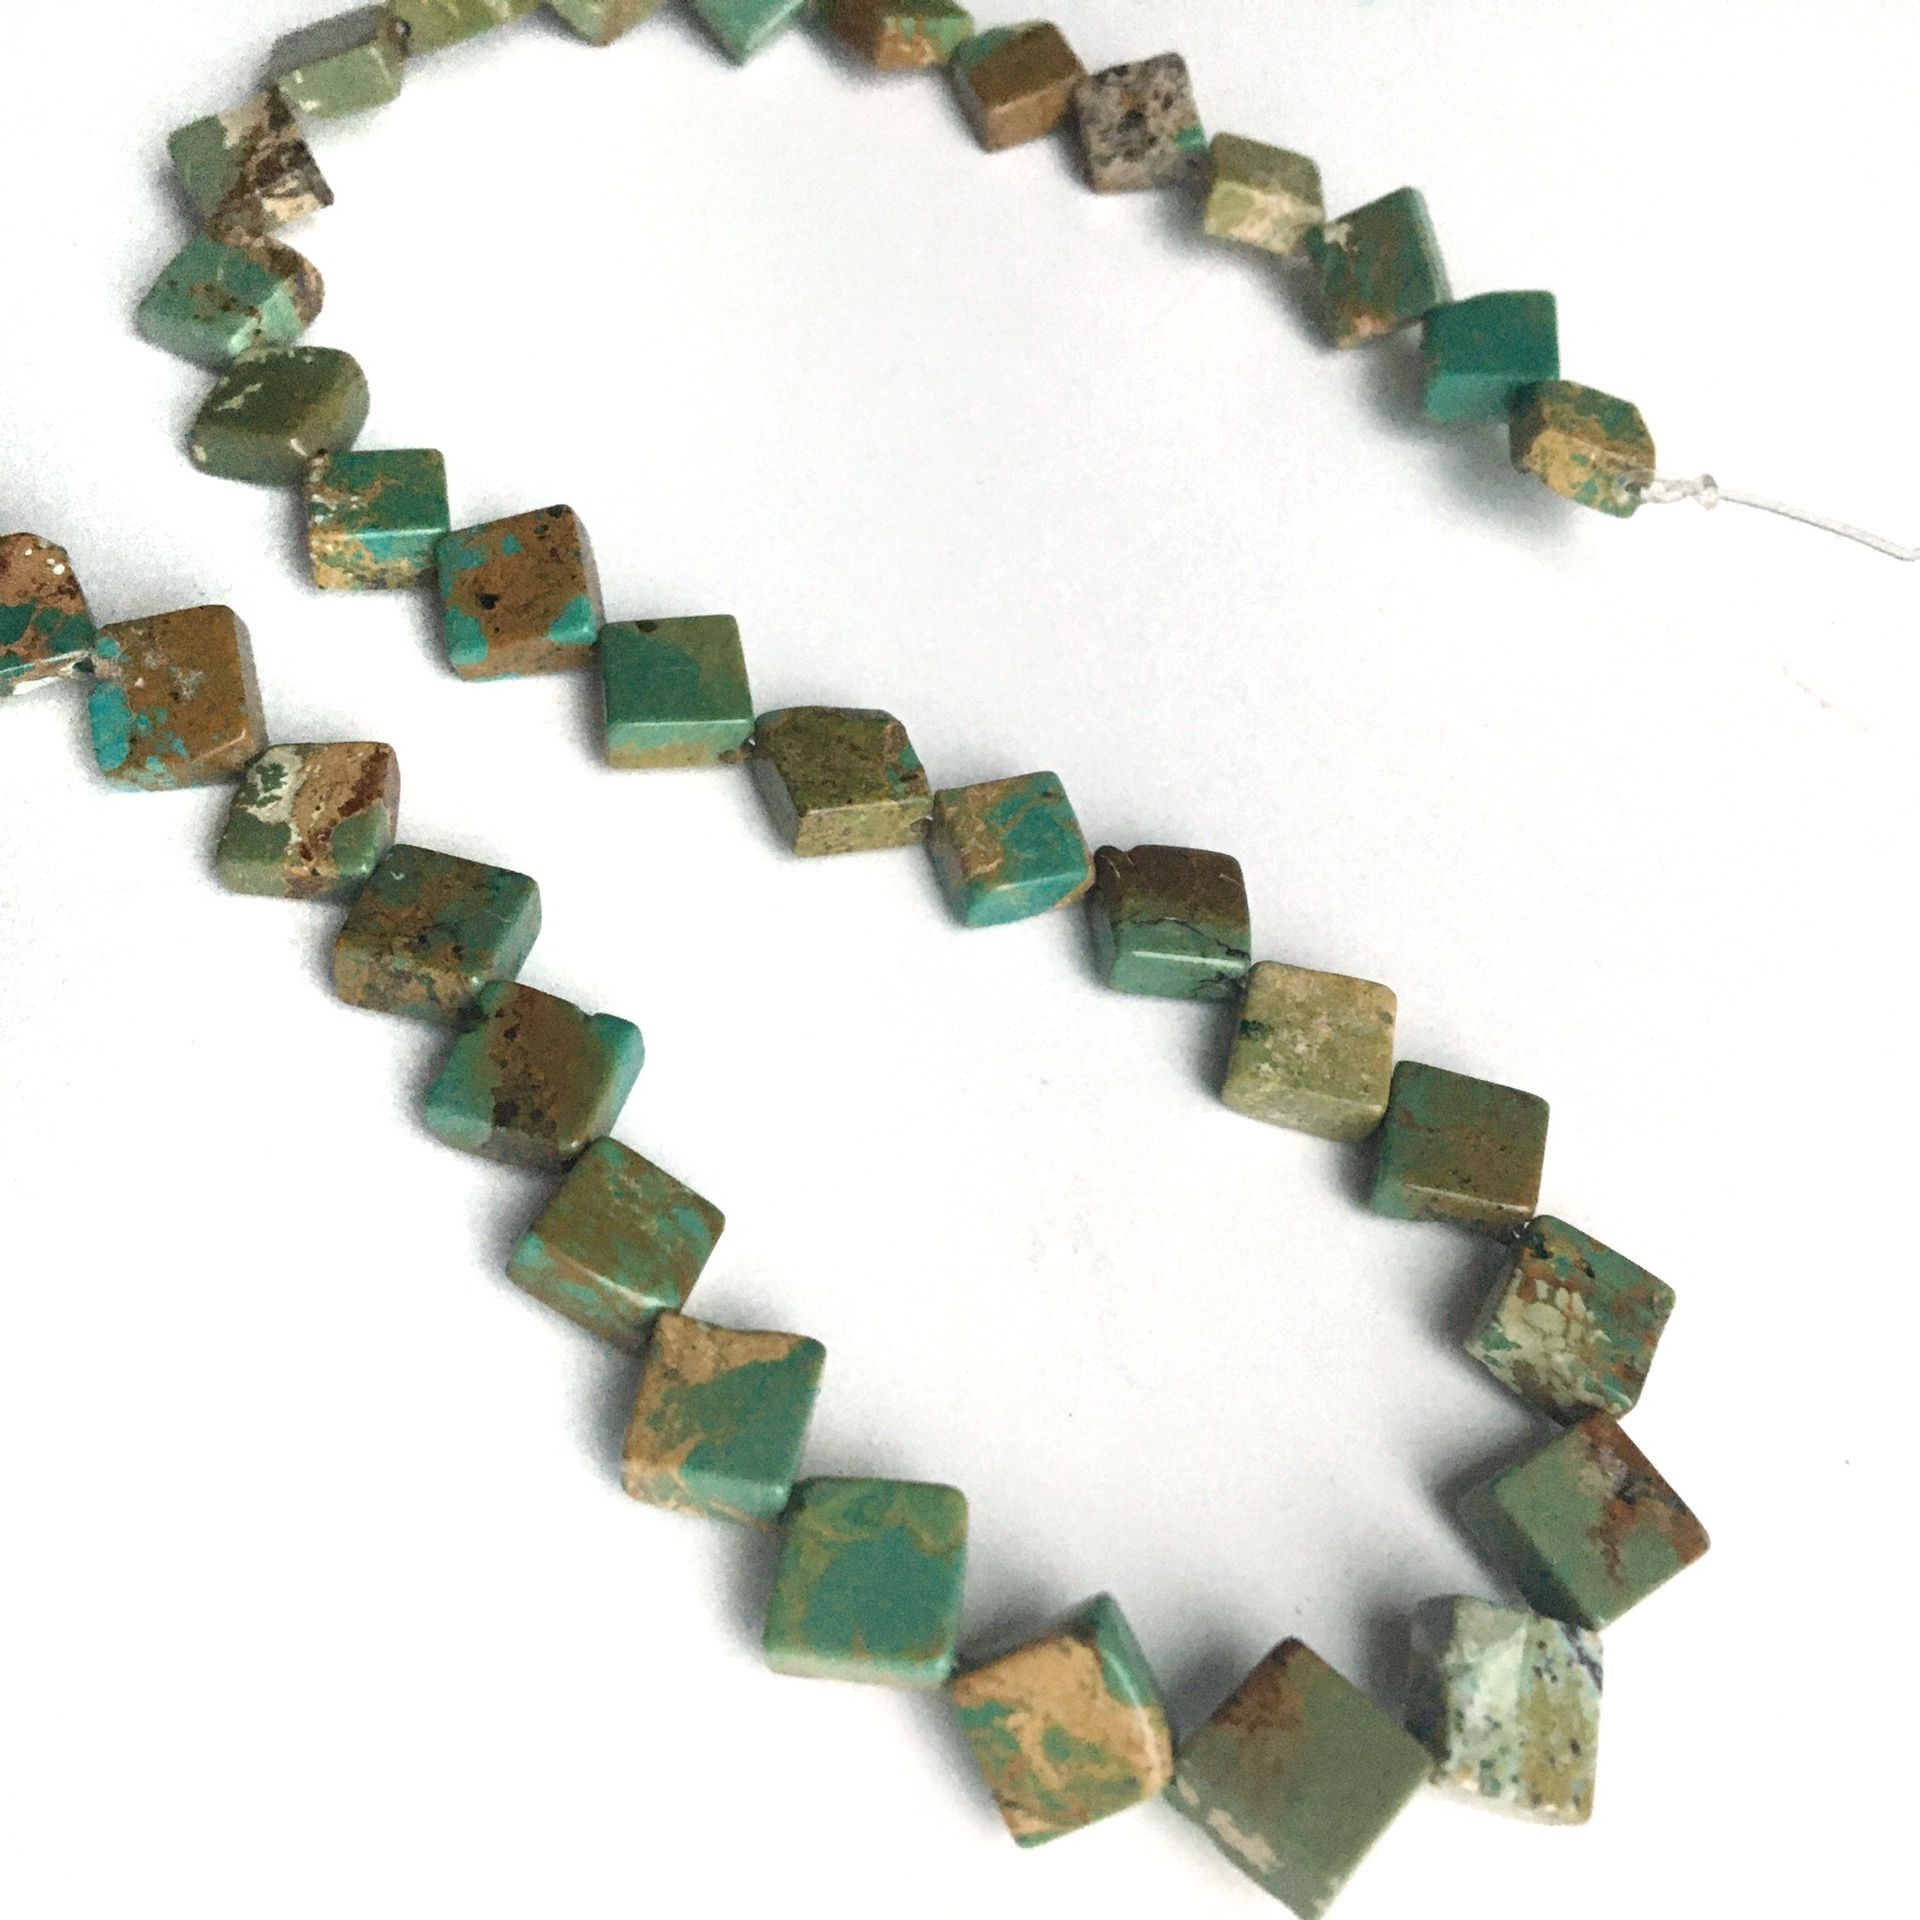 Turquoise flat cube beads drilled on point